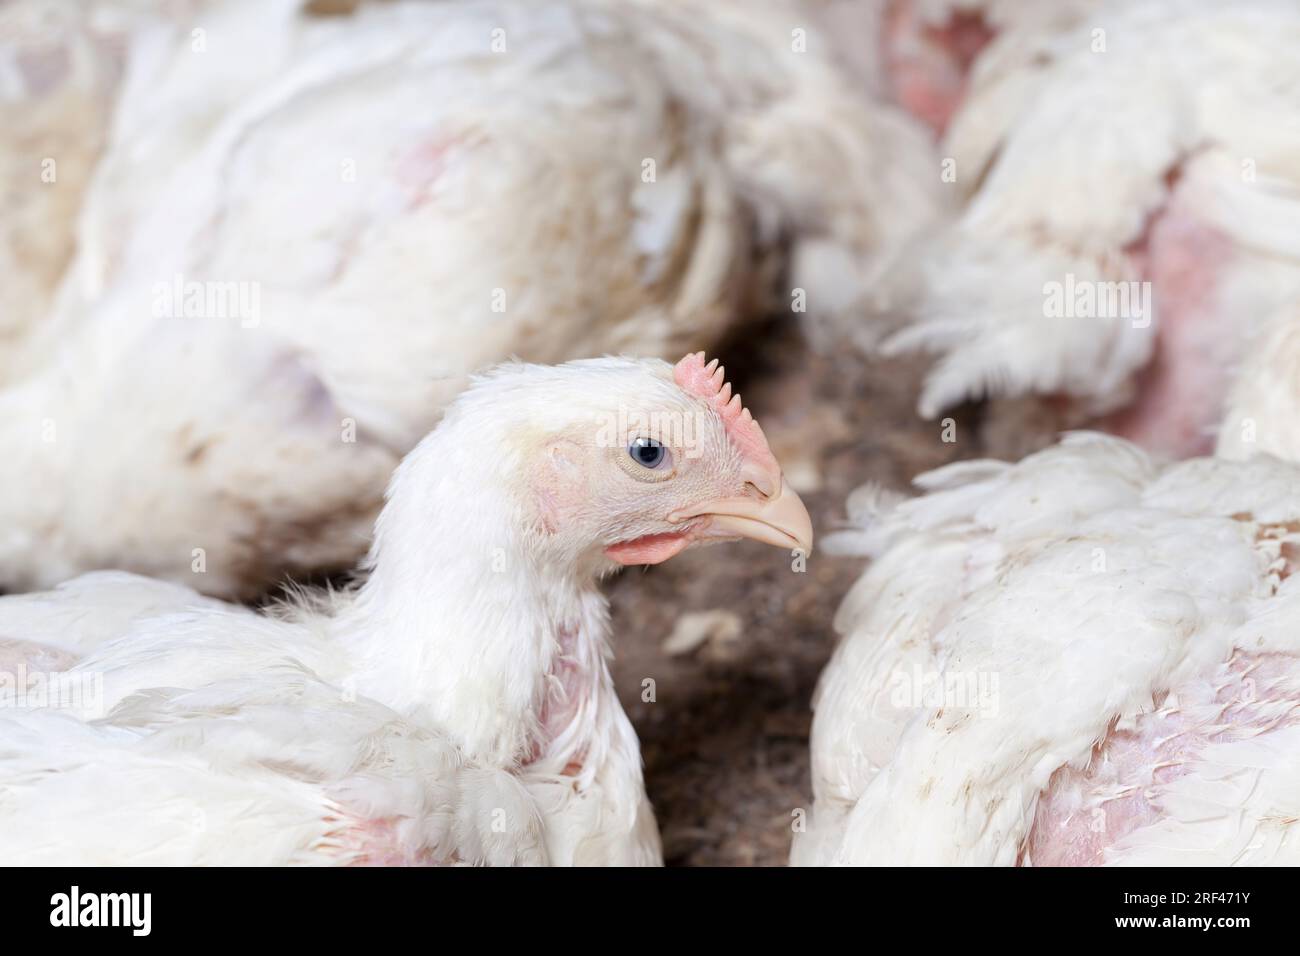 white broiler chicken chicks are raised to generate financial income from the sale of quality poultry meat chicken, a genetically improved broiler bre Stock Photo